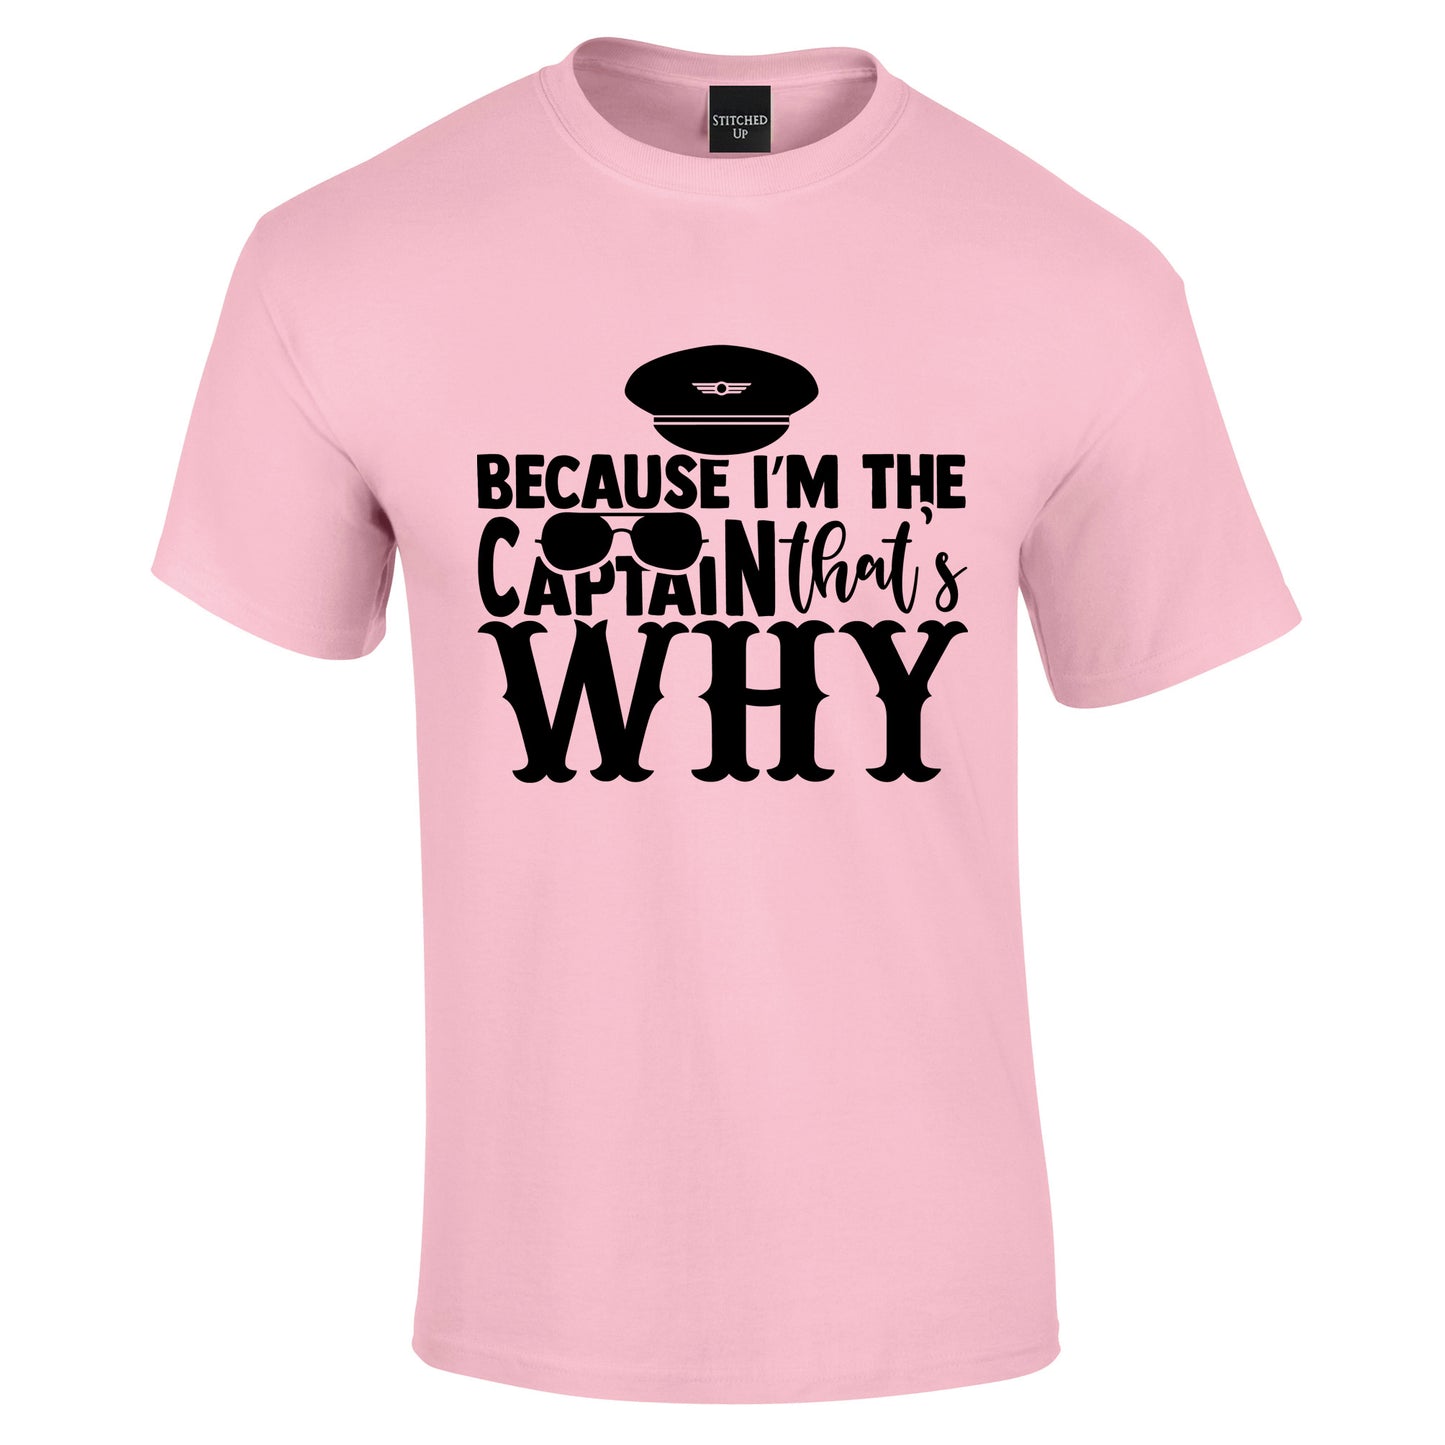 Because I'm the Captain T-Shirt